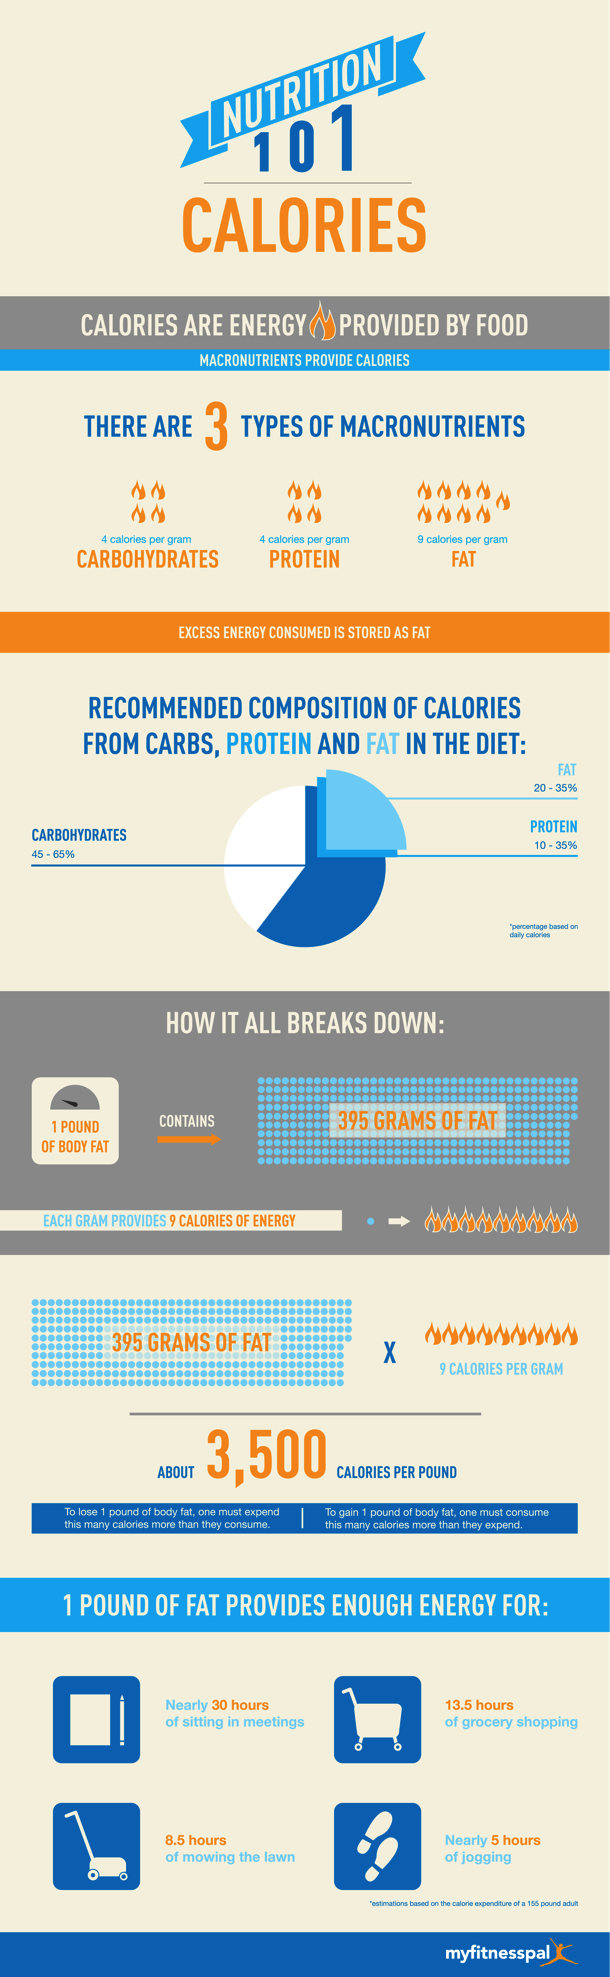 Calories-MyFitnessPal-Nutrition-101-Infographic2